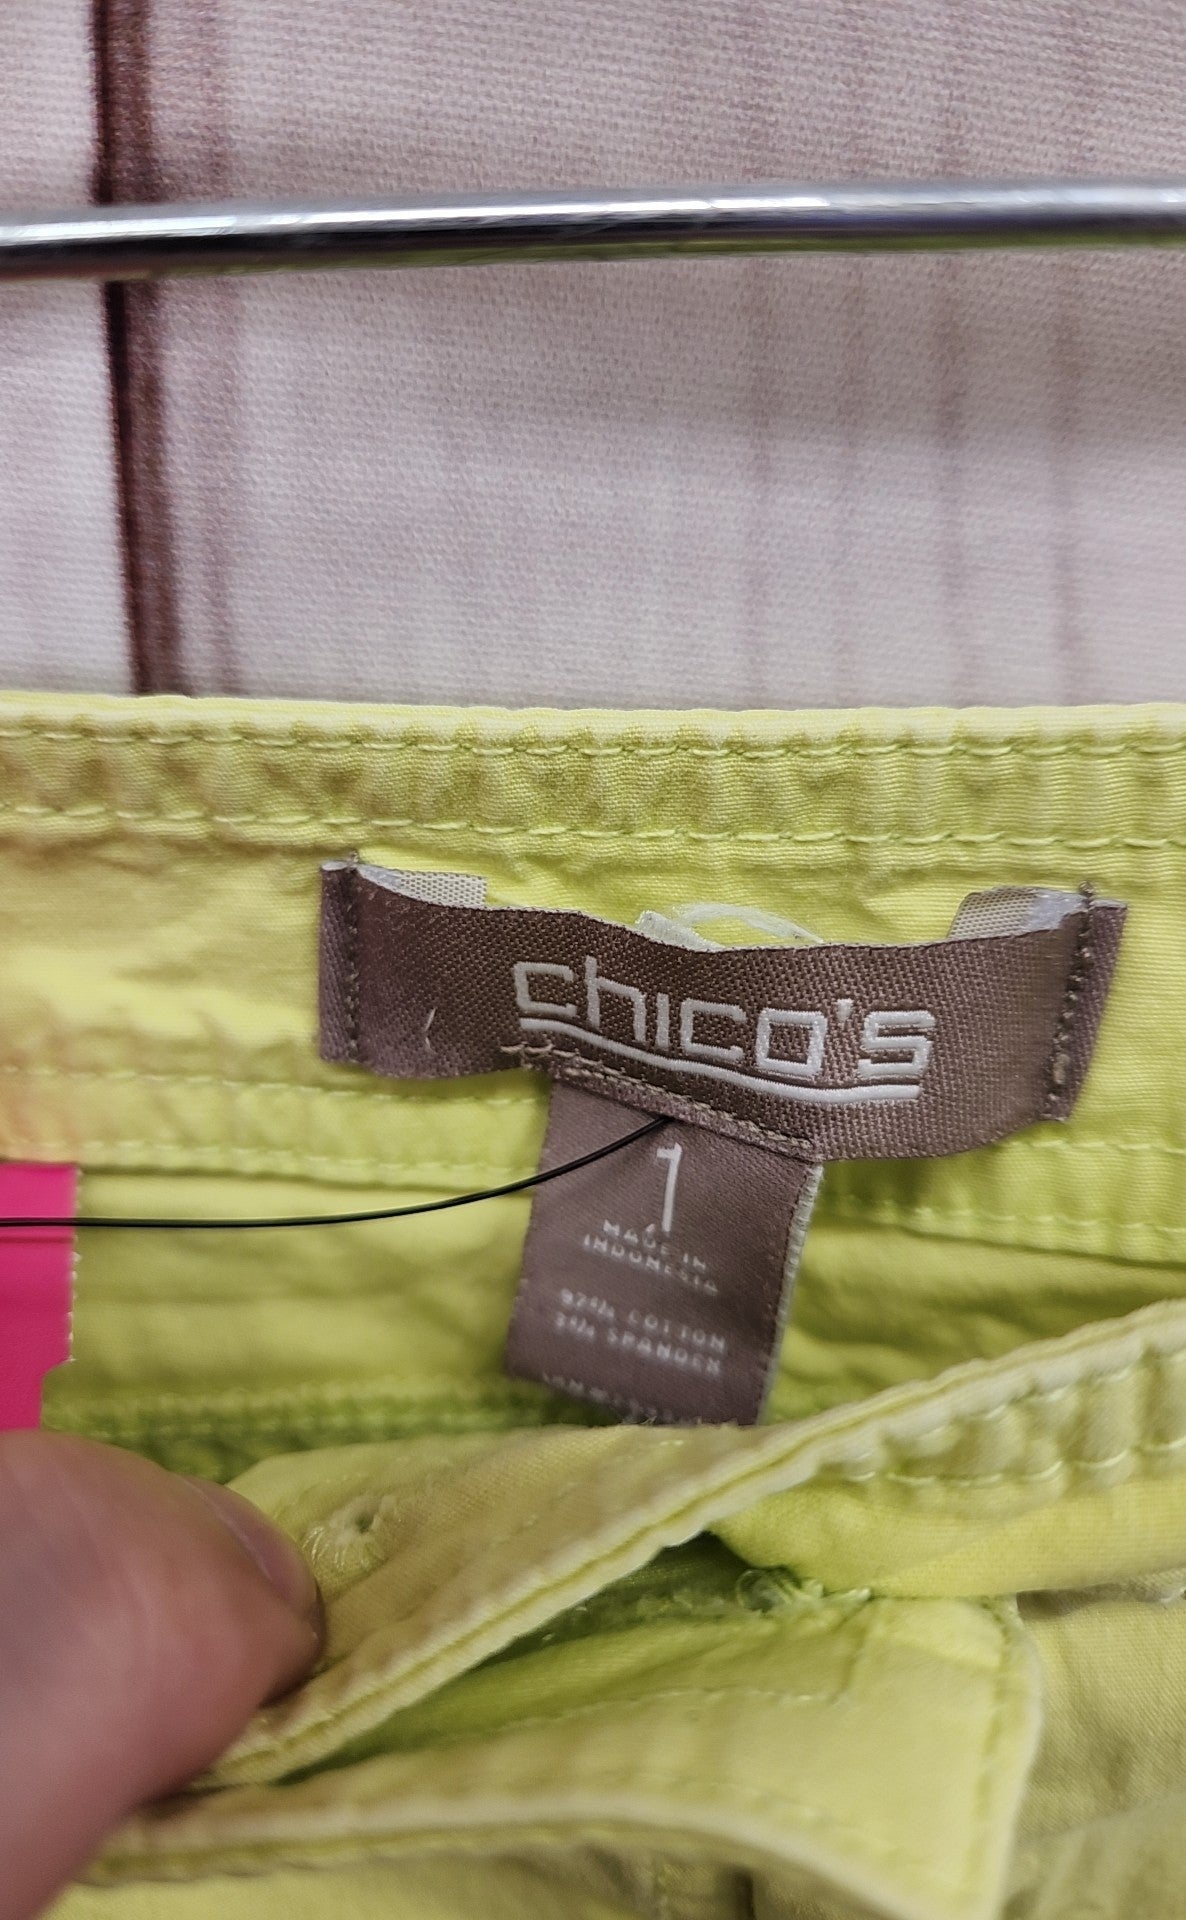 Chico's Women's Size 8 Lime Green Shorts